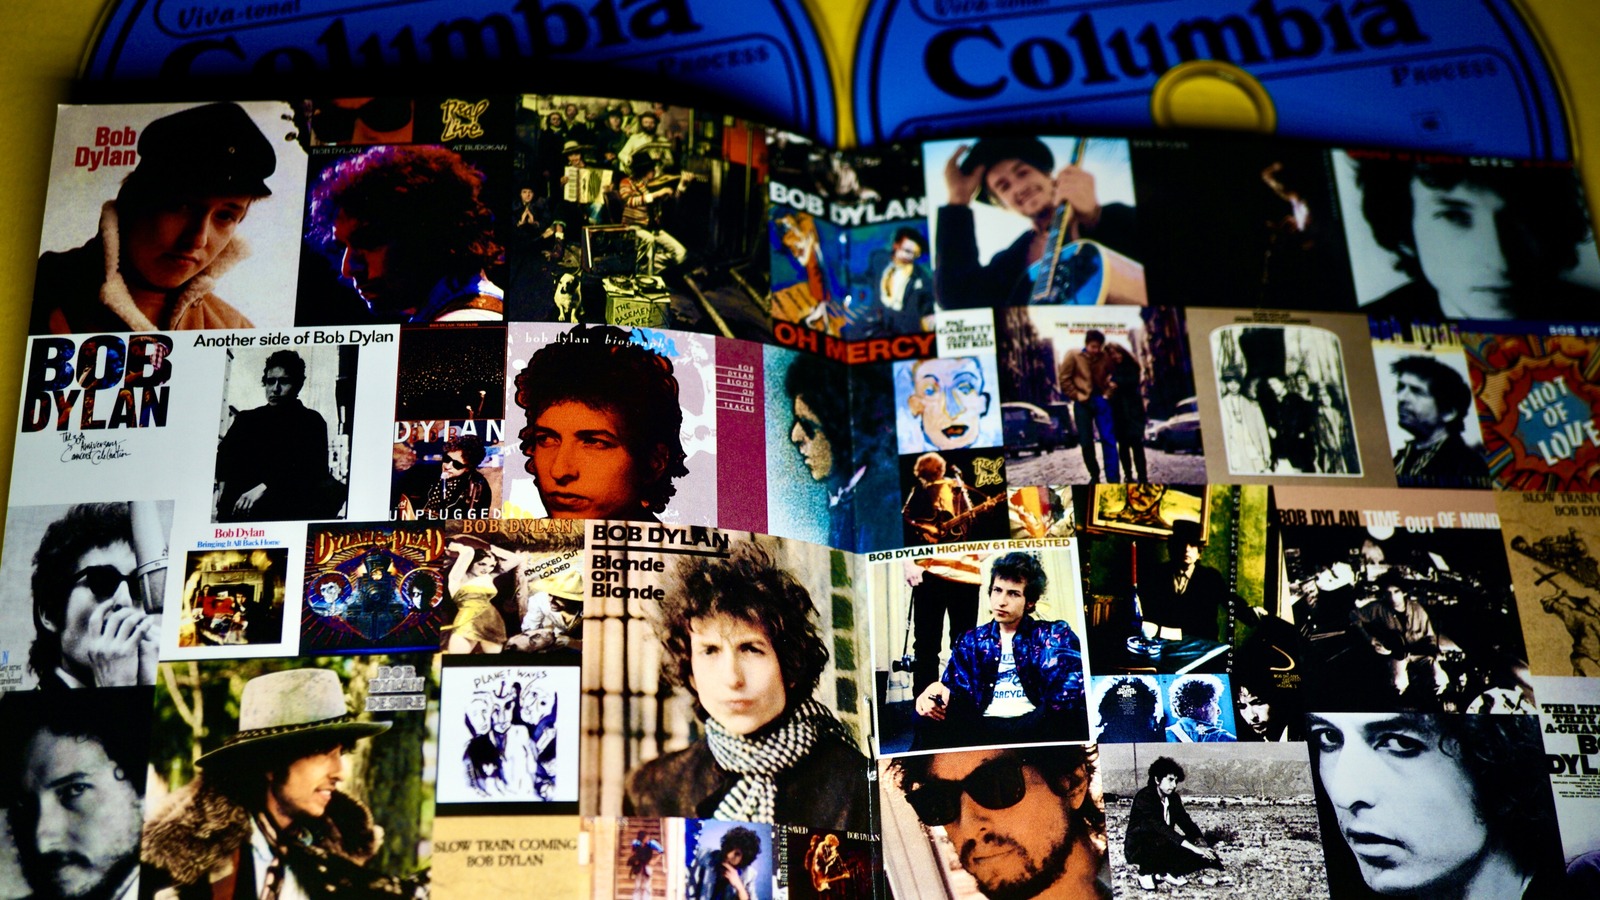 A body of work 60 years in the making: Dylan's musical evolution. Image courtesy Shutterstock/2026441667